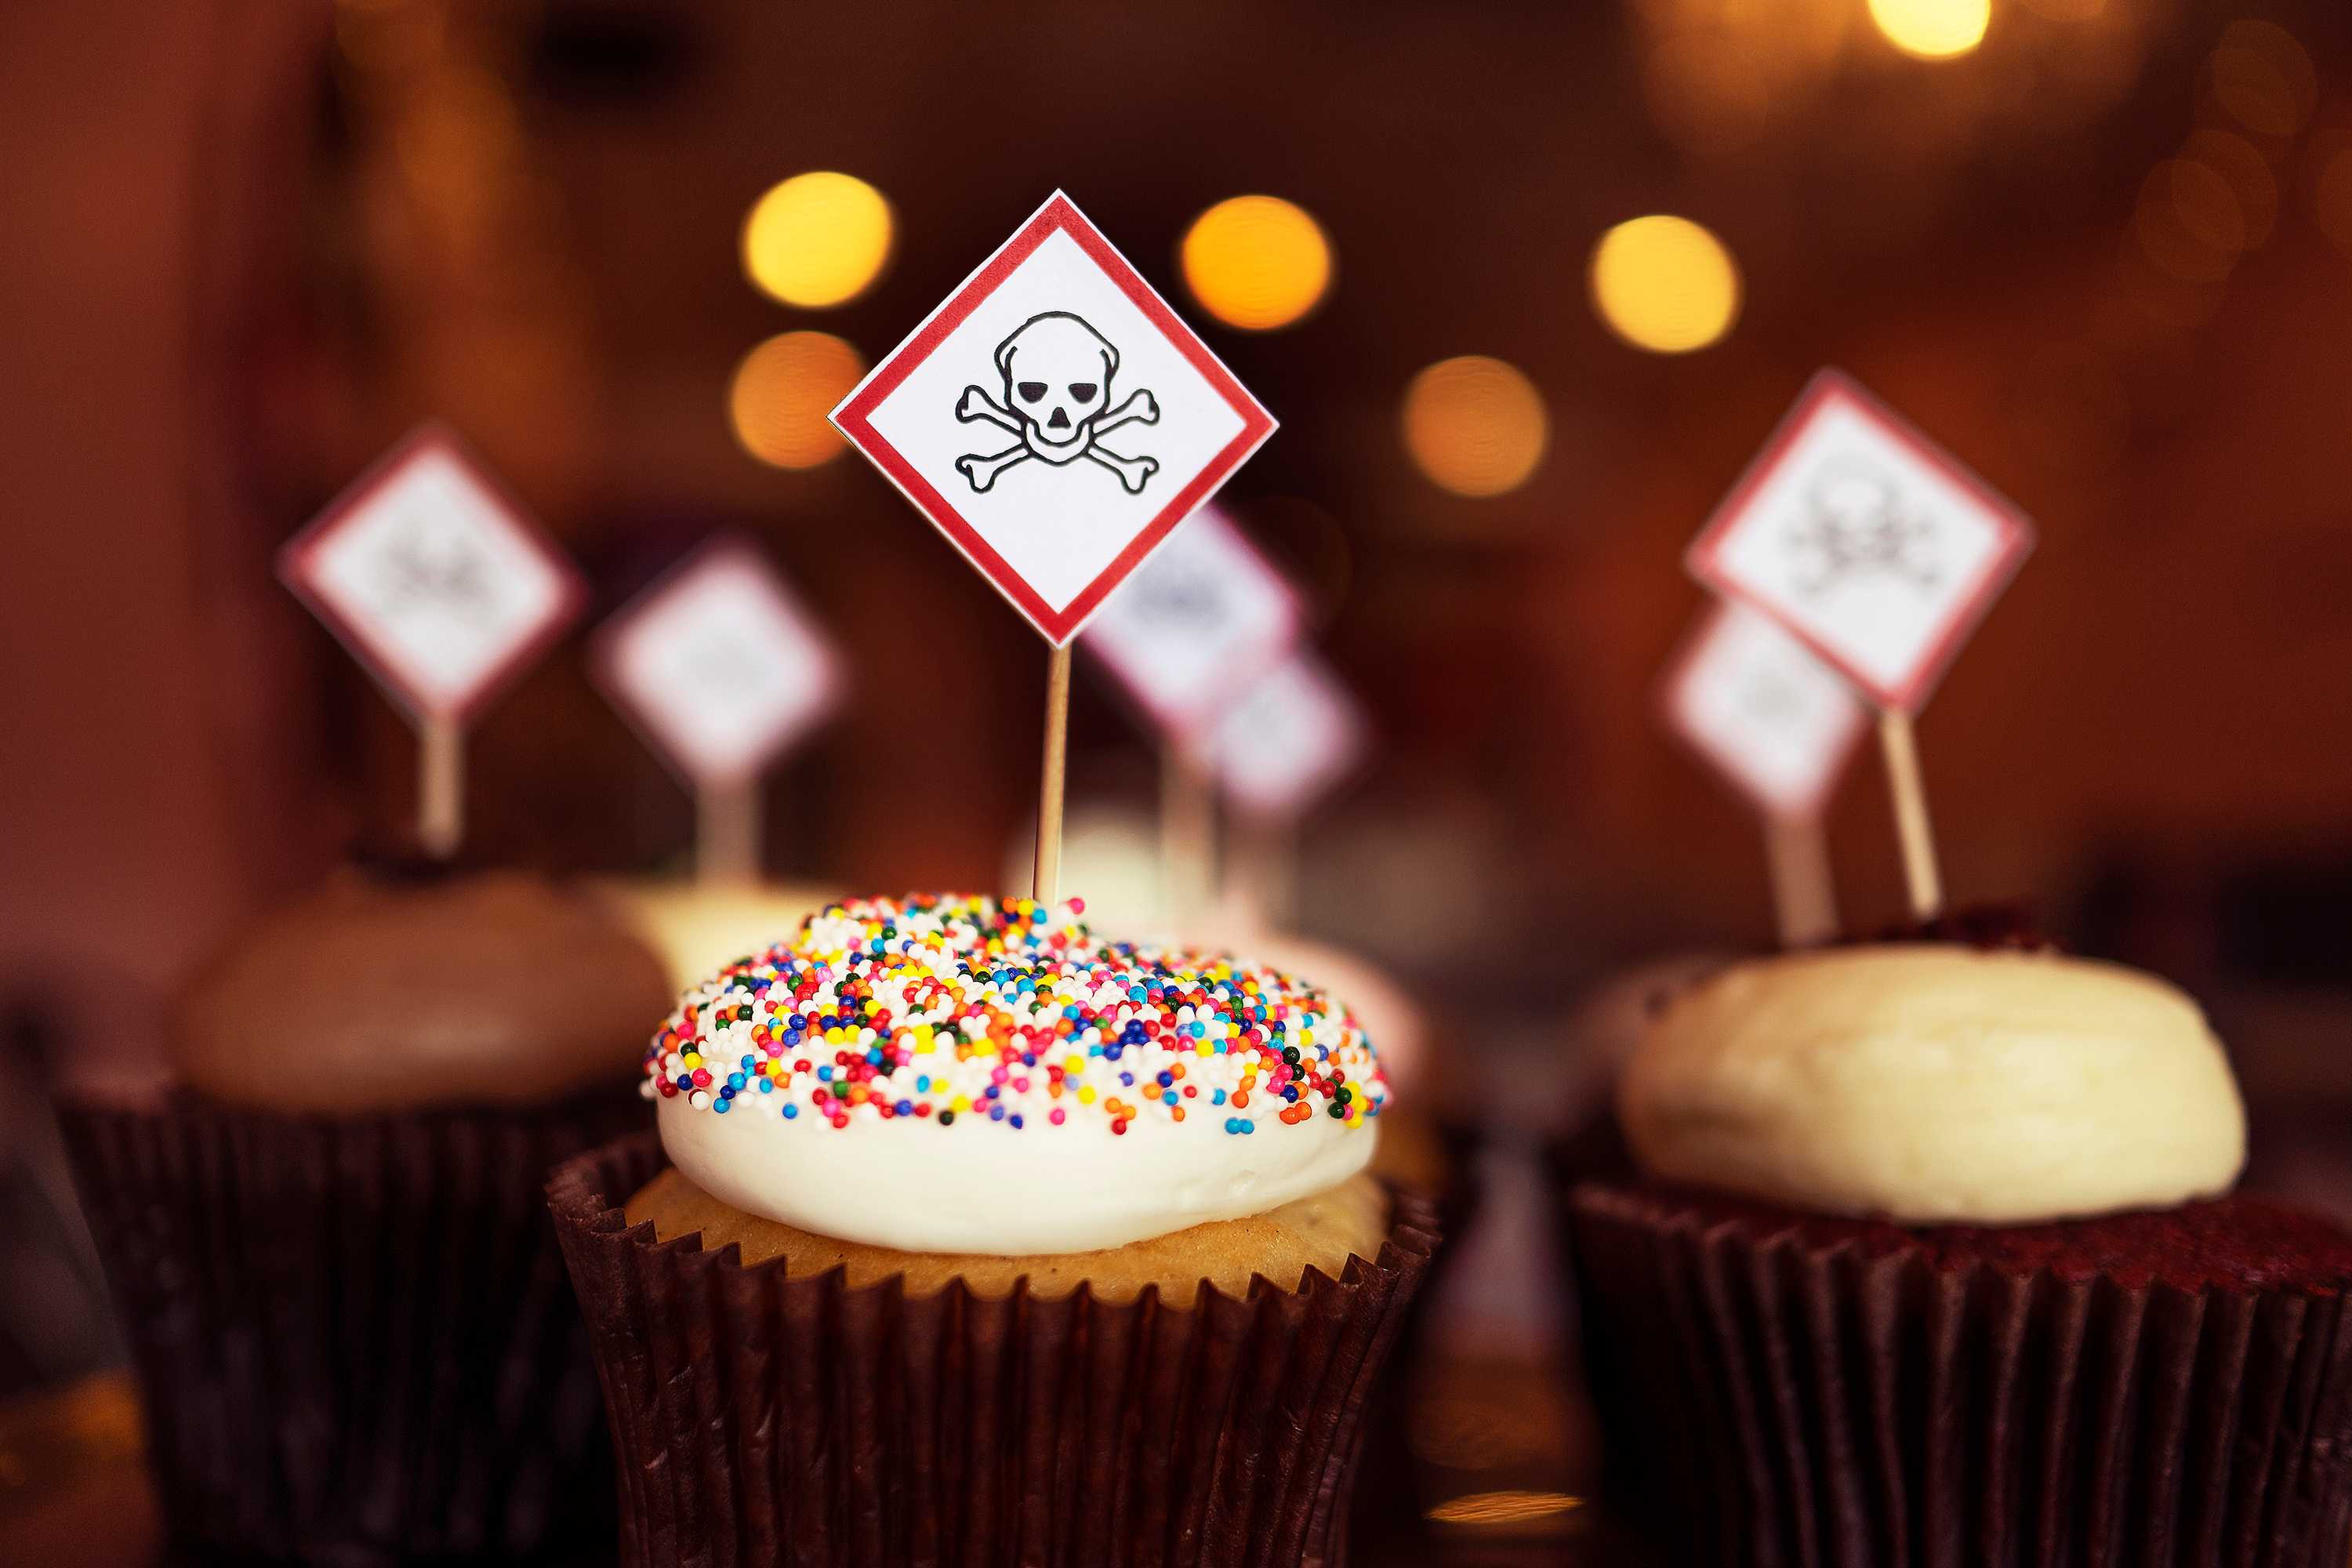 Cupcakes and toppers with poison symbols on them. Avoid frequent deserts like cupcakes to reduce high blood sugar.